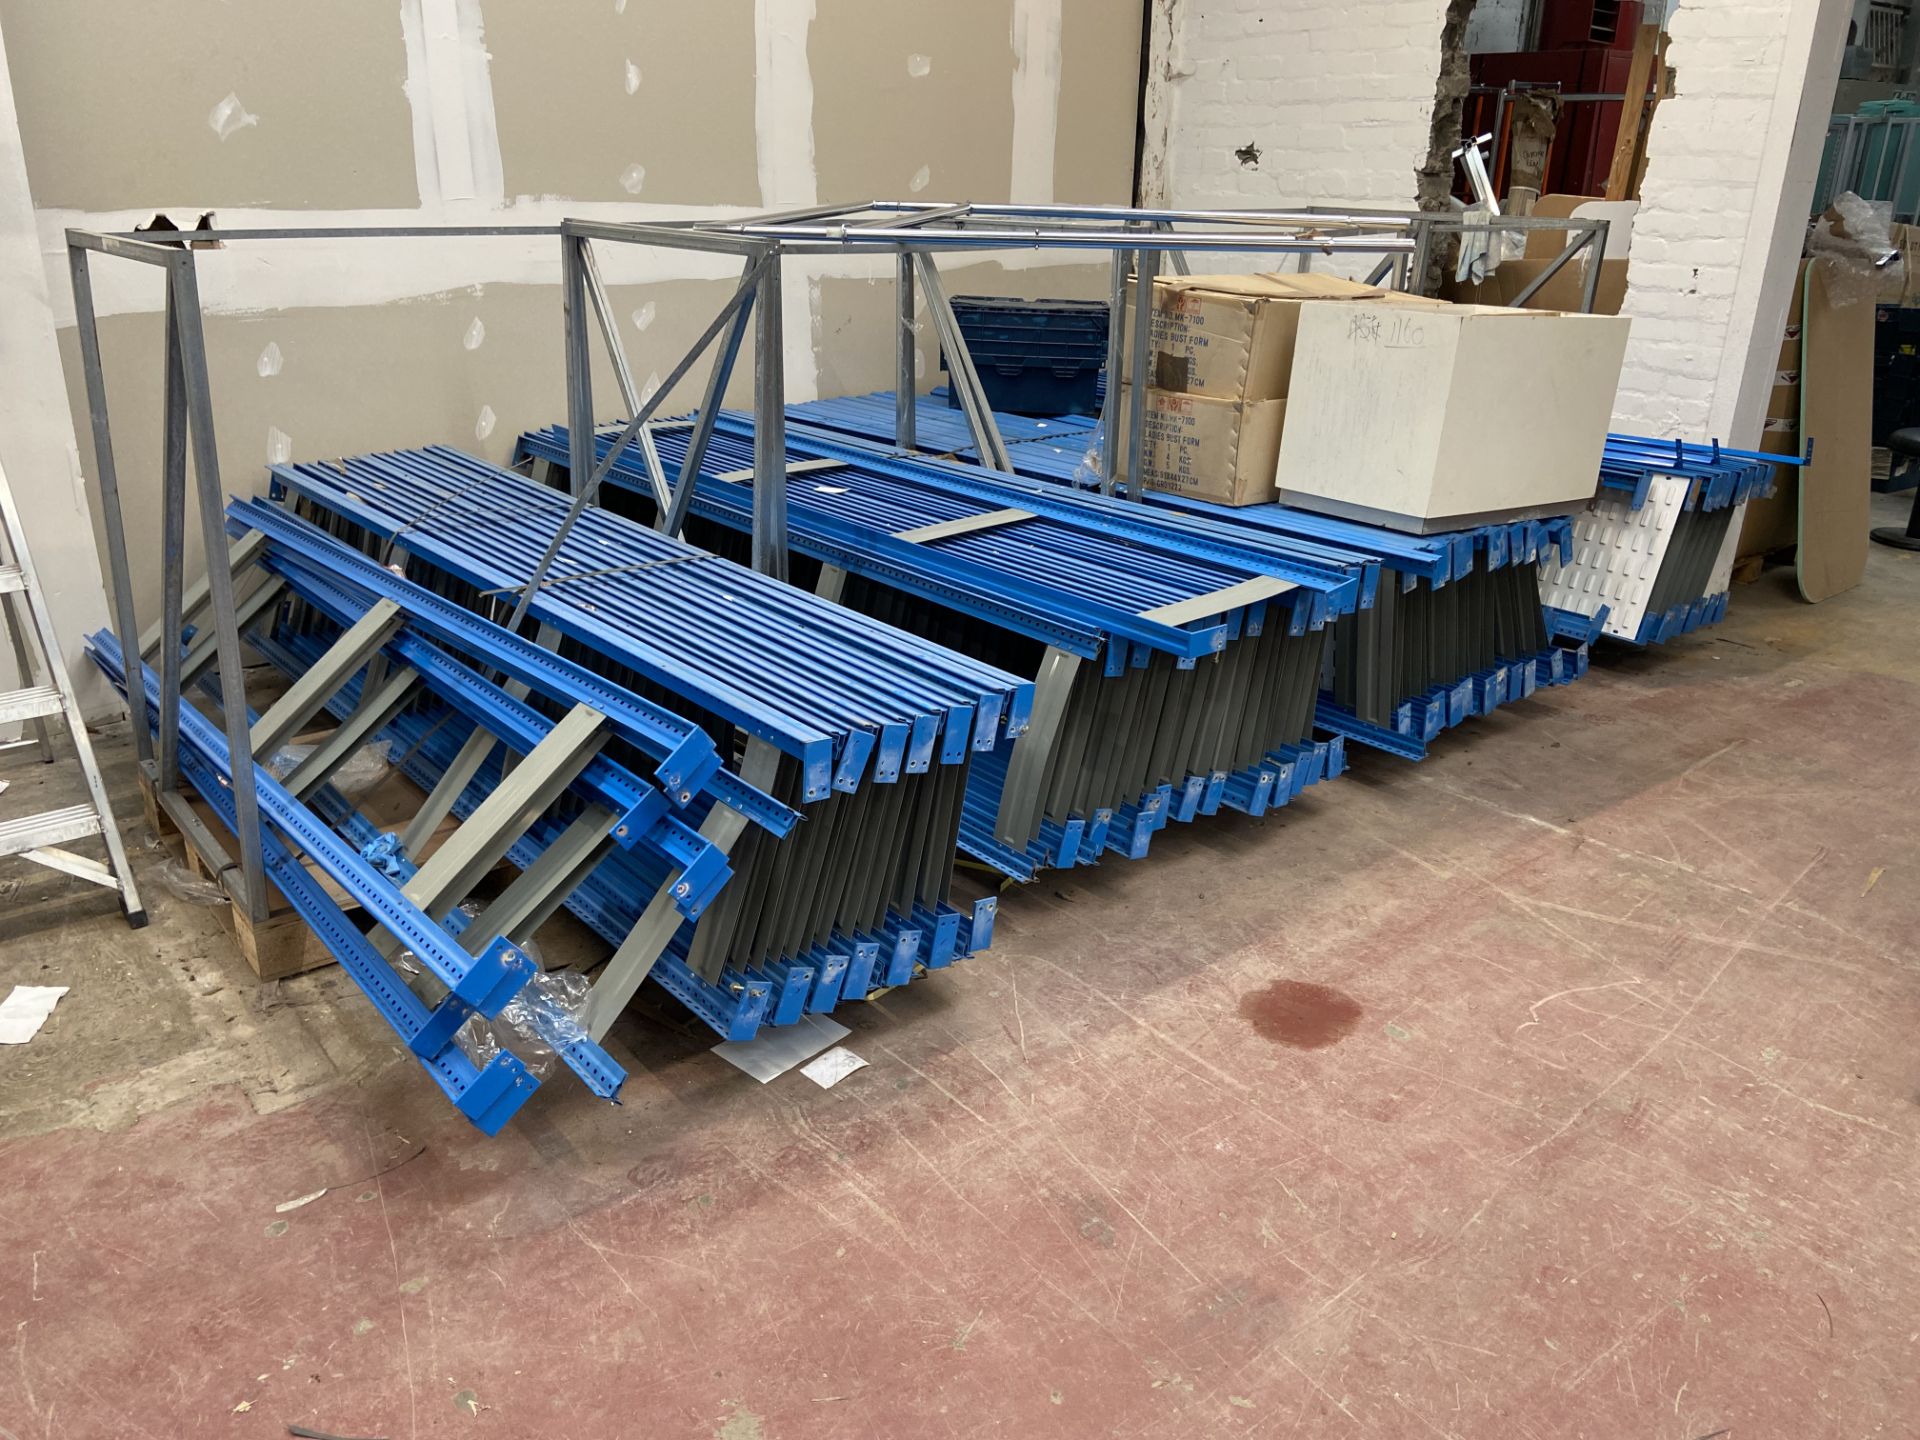 STOCK RACK END FRAMES, as set out in one area, with 12 cage pallets and on three pallets and also as - Image 2 of 5